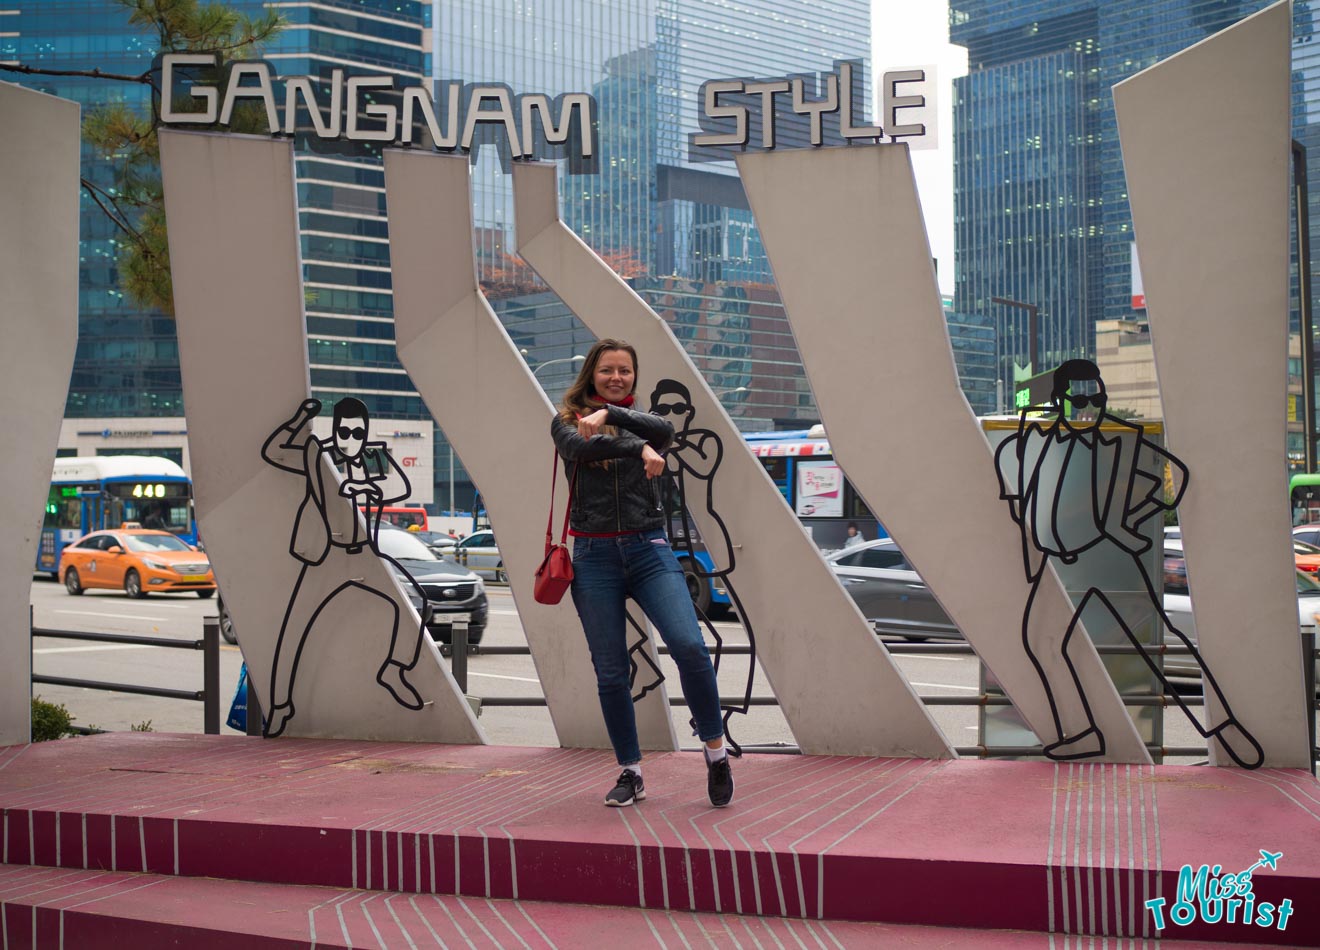 Yulia Saf, the author of the post, posing for a picture in front of a monument dedicated to Gangnam Style